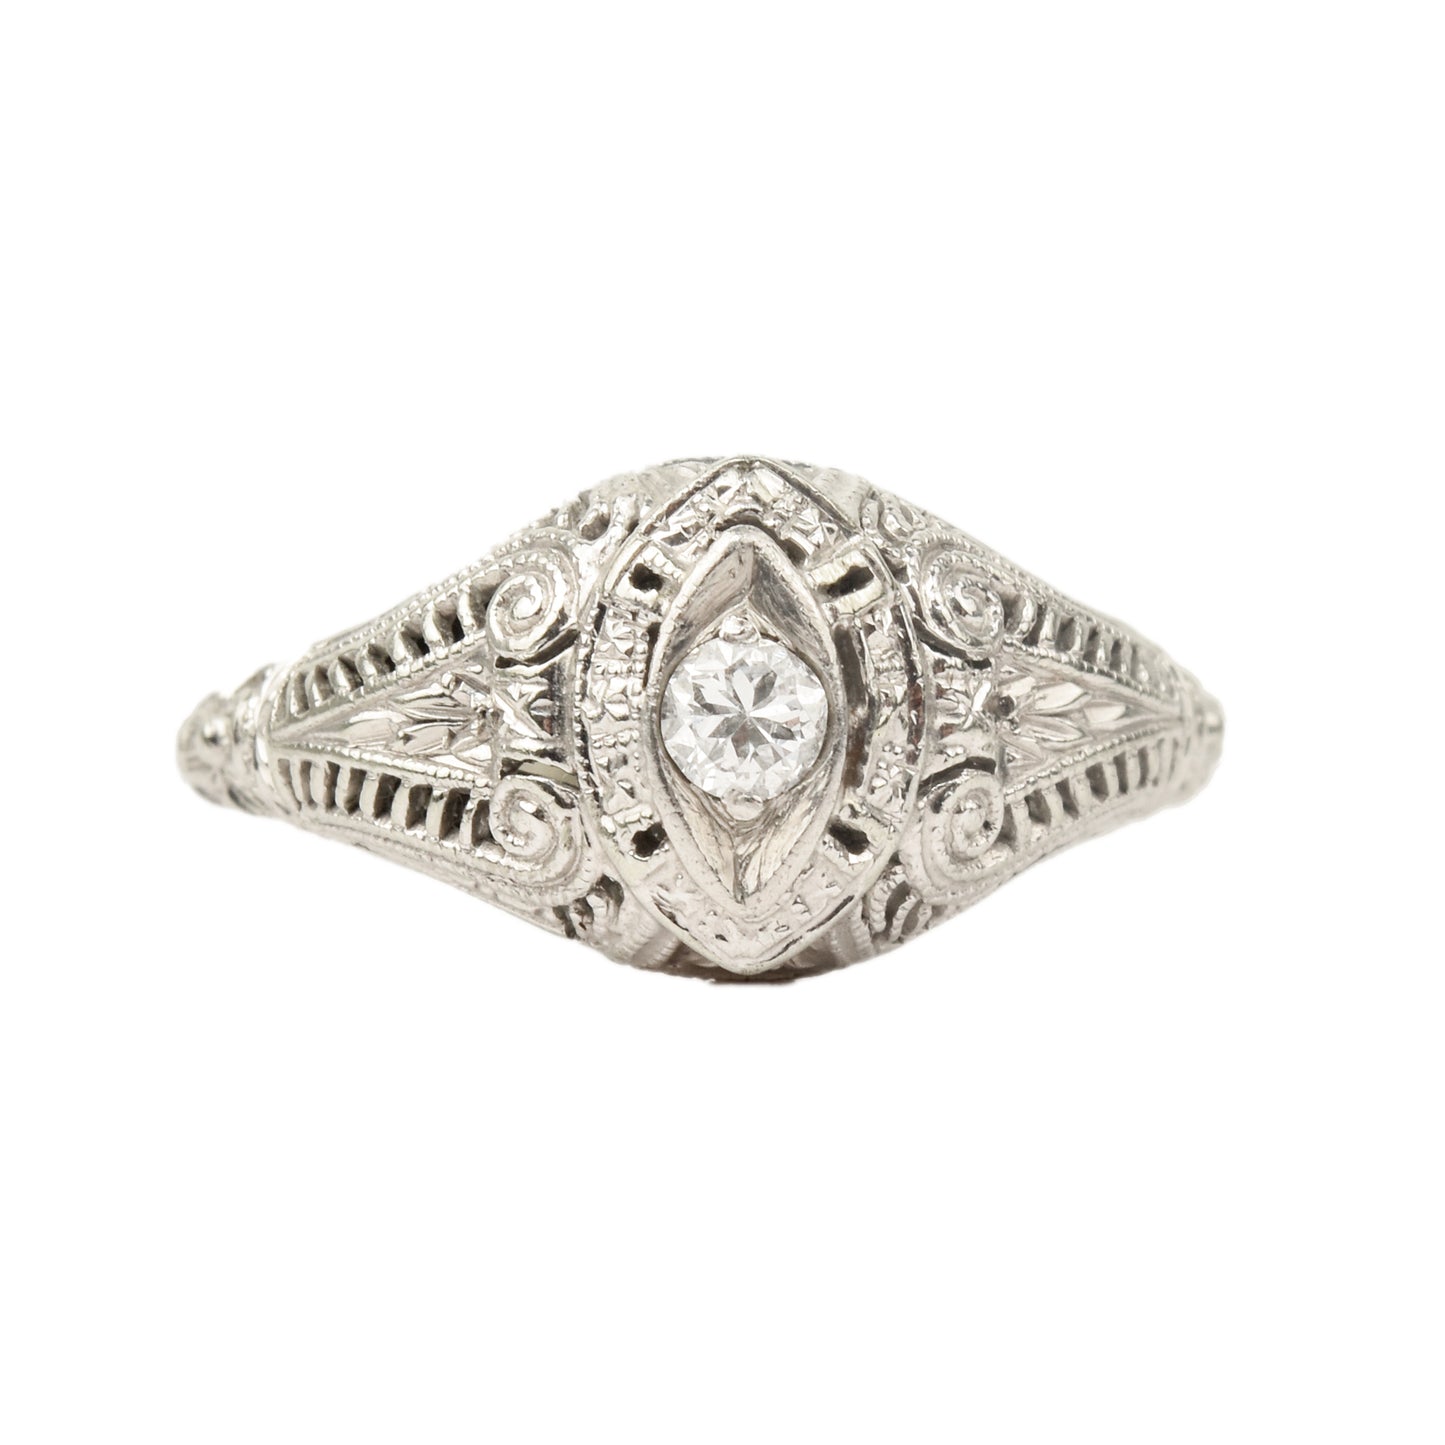 Art Deco 18K white gold filigree diamond solitaire ring featuring a 0.08 carat brilliant-cut diamond, size 6.25 US, with intricate metalwork details on a white background